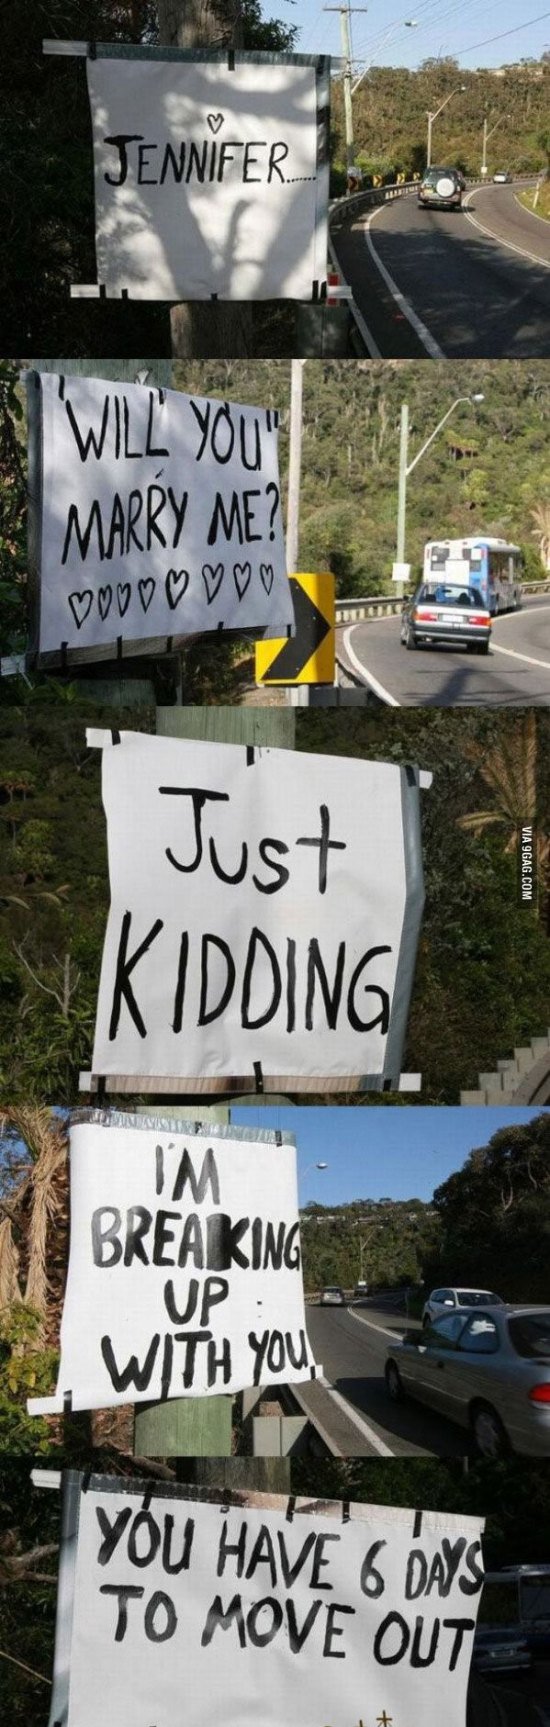 funny breakup signs - Jennifer Will You" Marry Me? vooo 0 Vdc Via 9GAG.Com Just Kidding Im Breaking With You, Up You Have 6 Days To Move Out